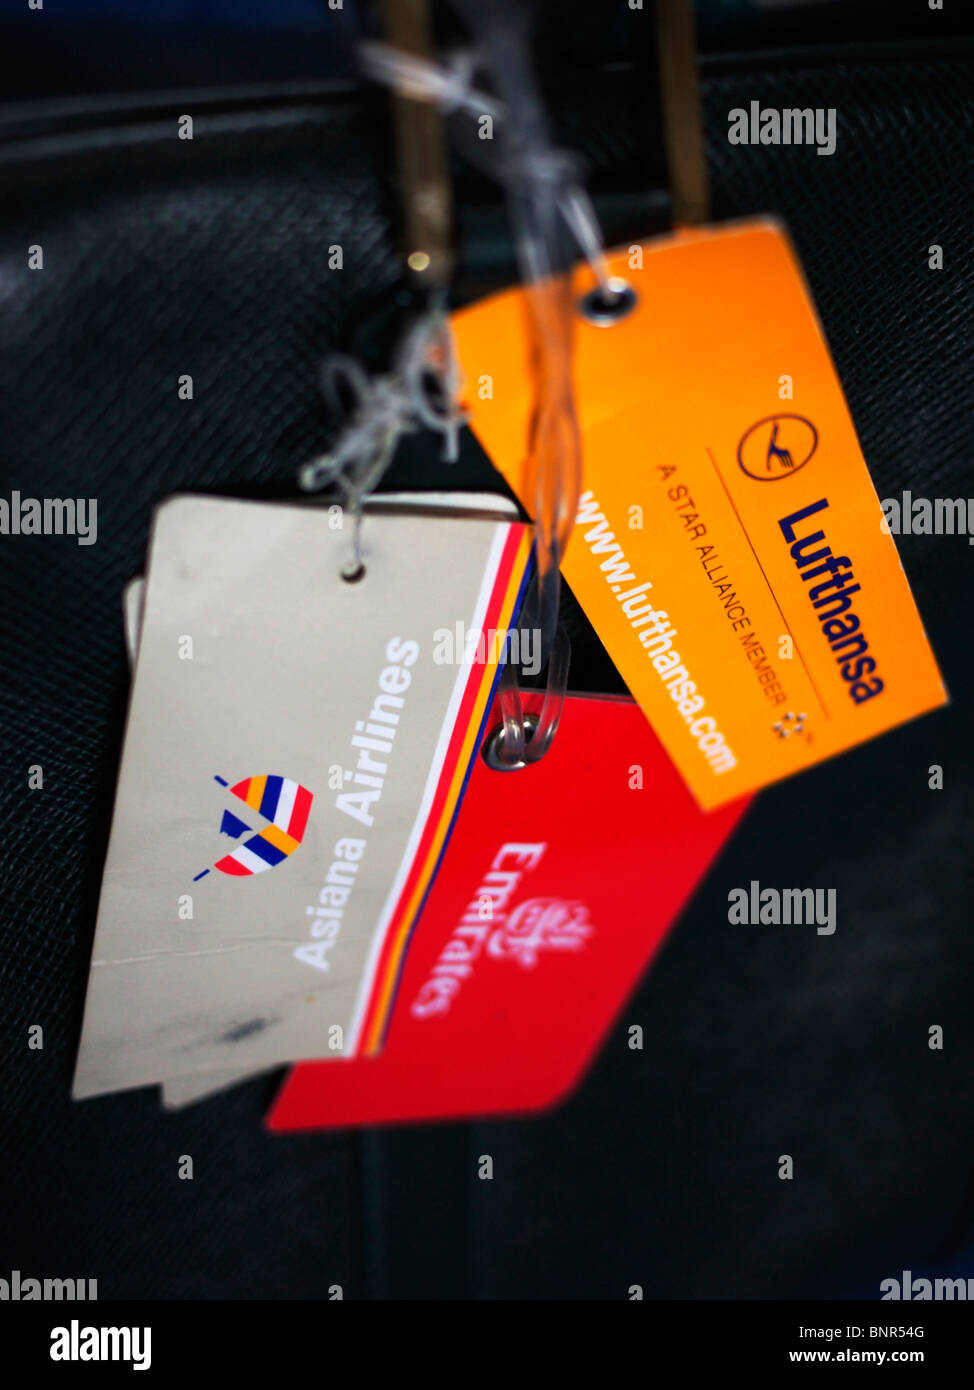 Passenger name tags bearing logos of different carriers Stock Photo